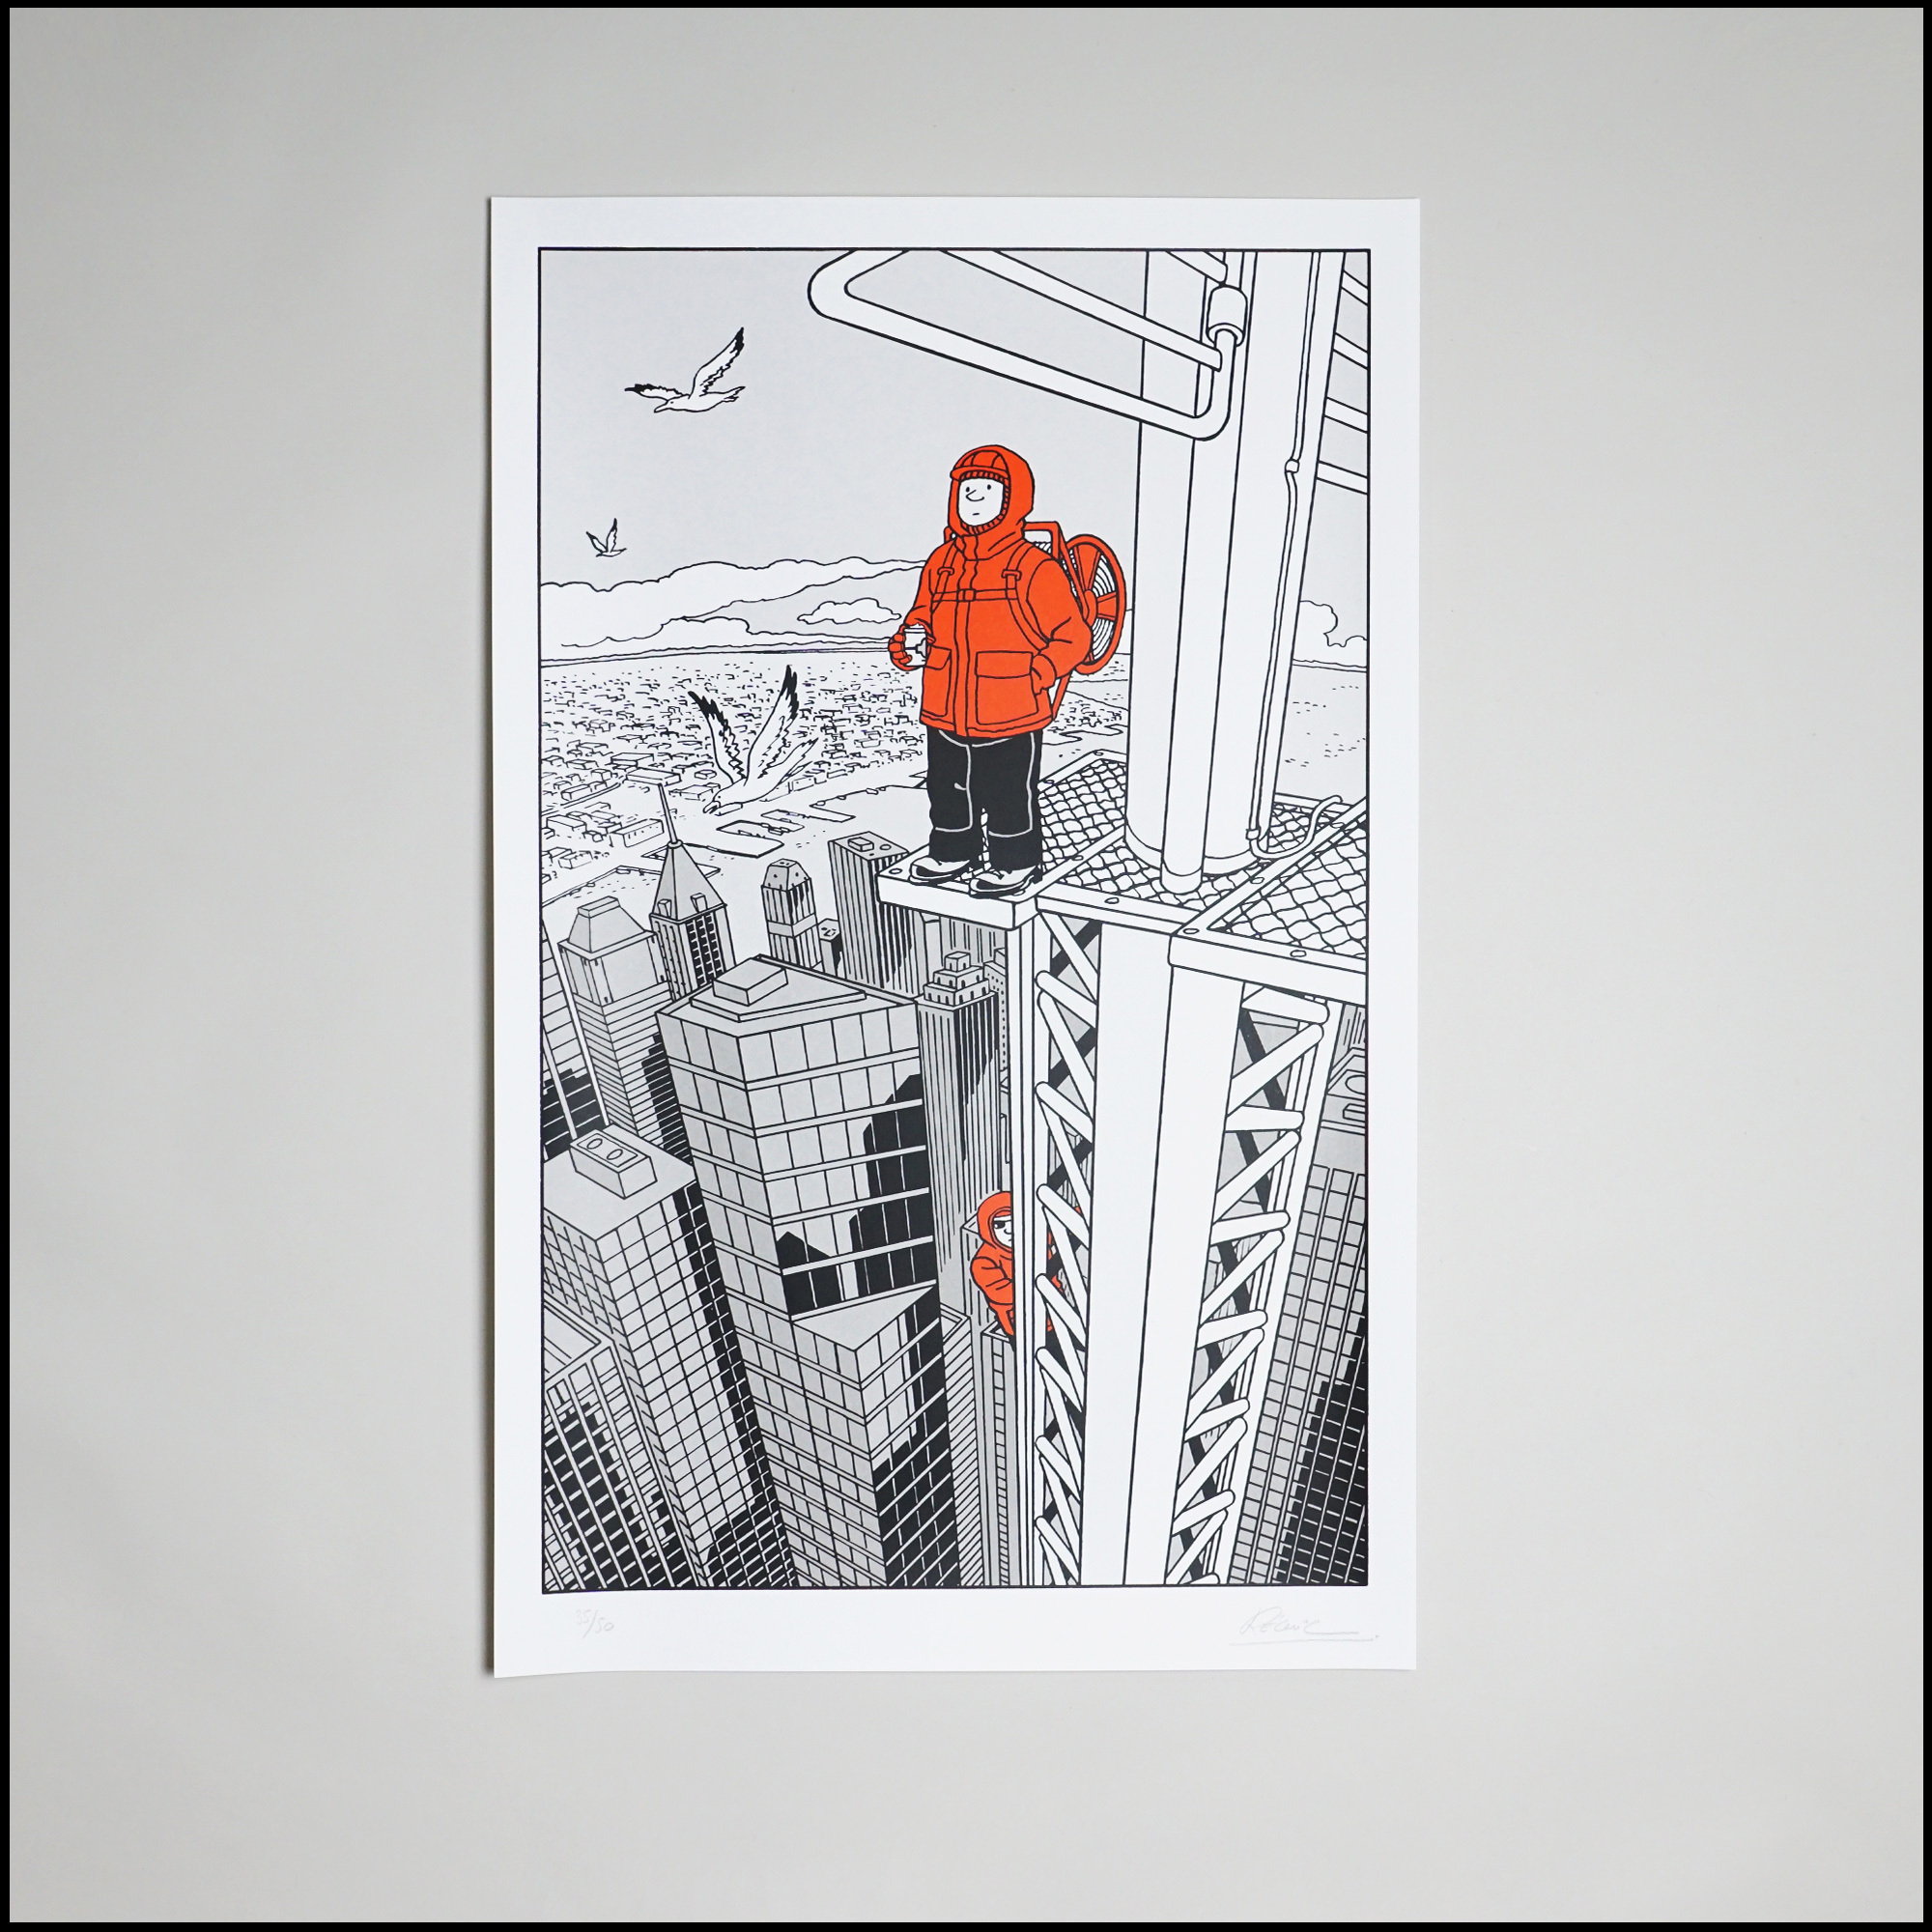 « DAY » Screen print by Arpenteur for C'H'C'M'